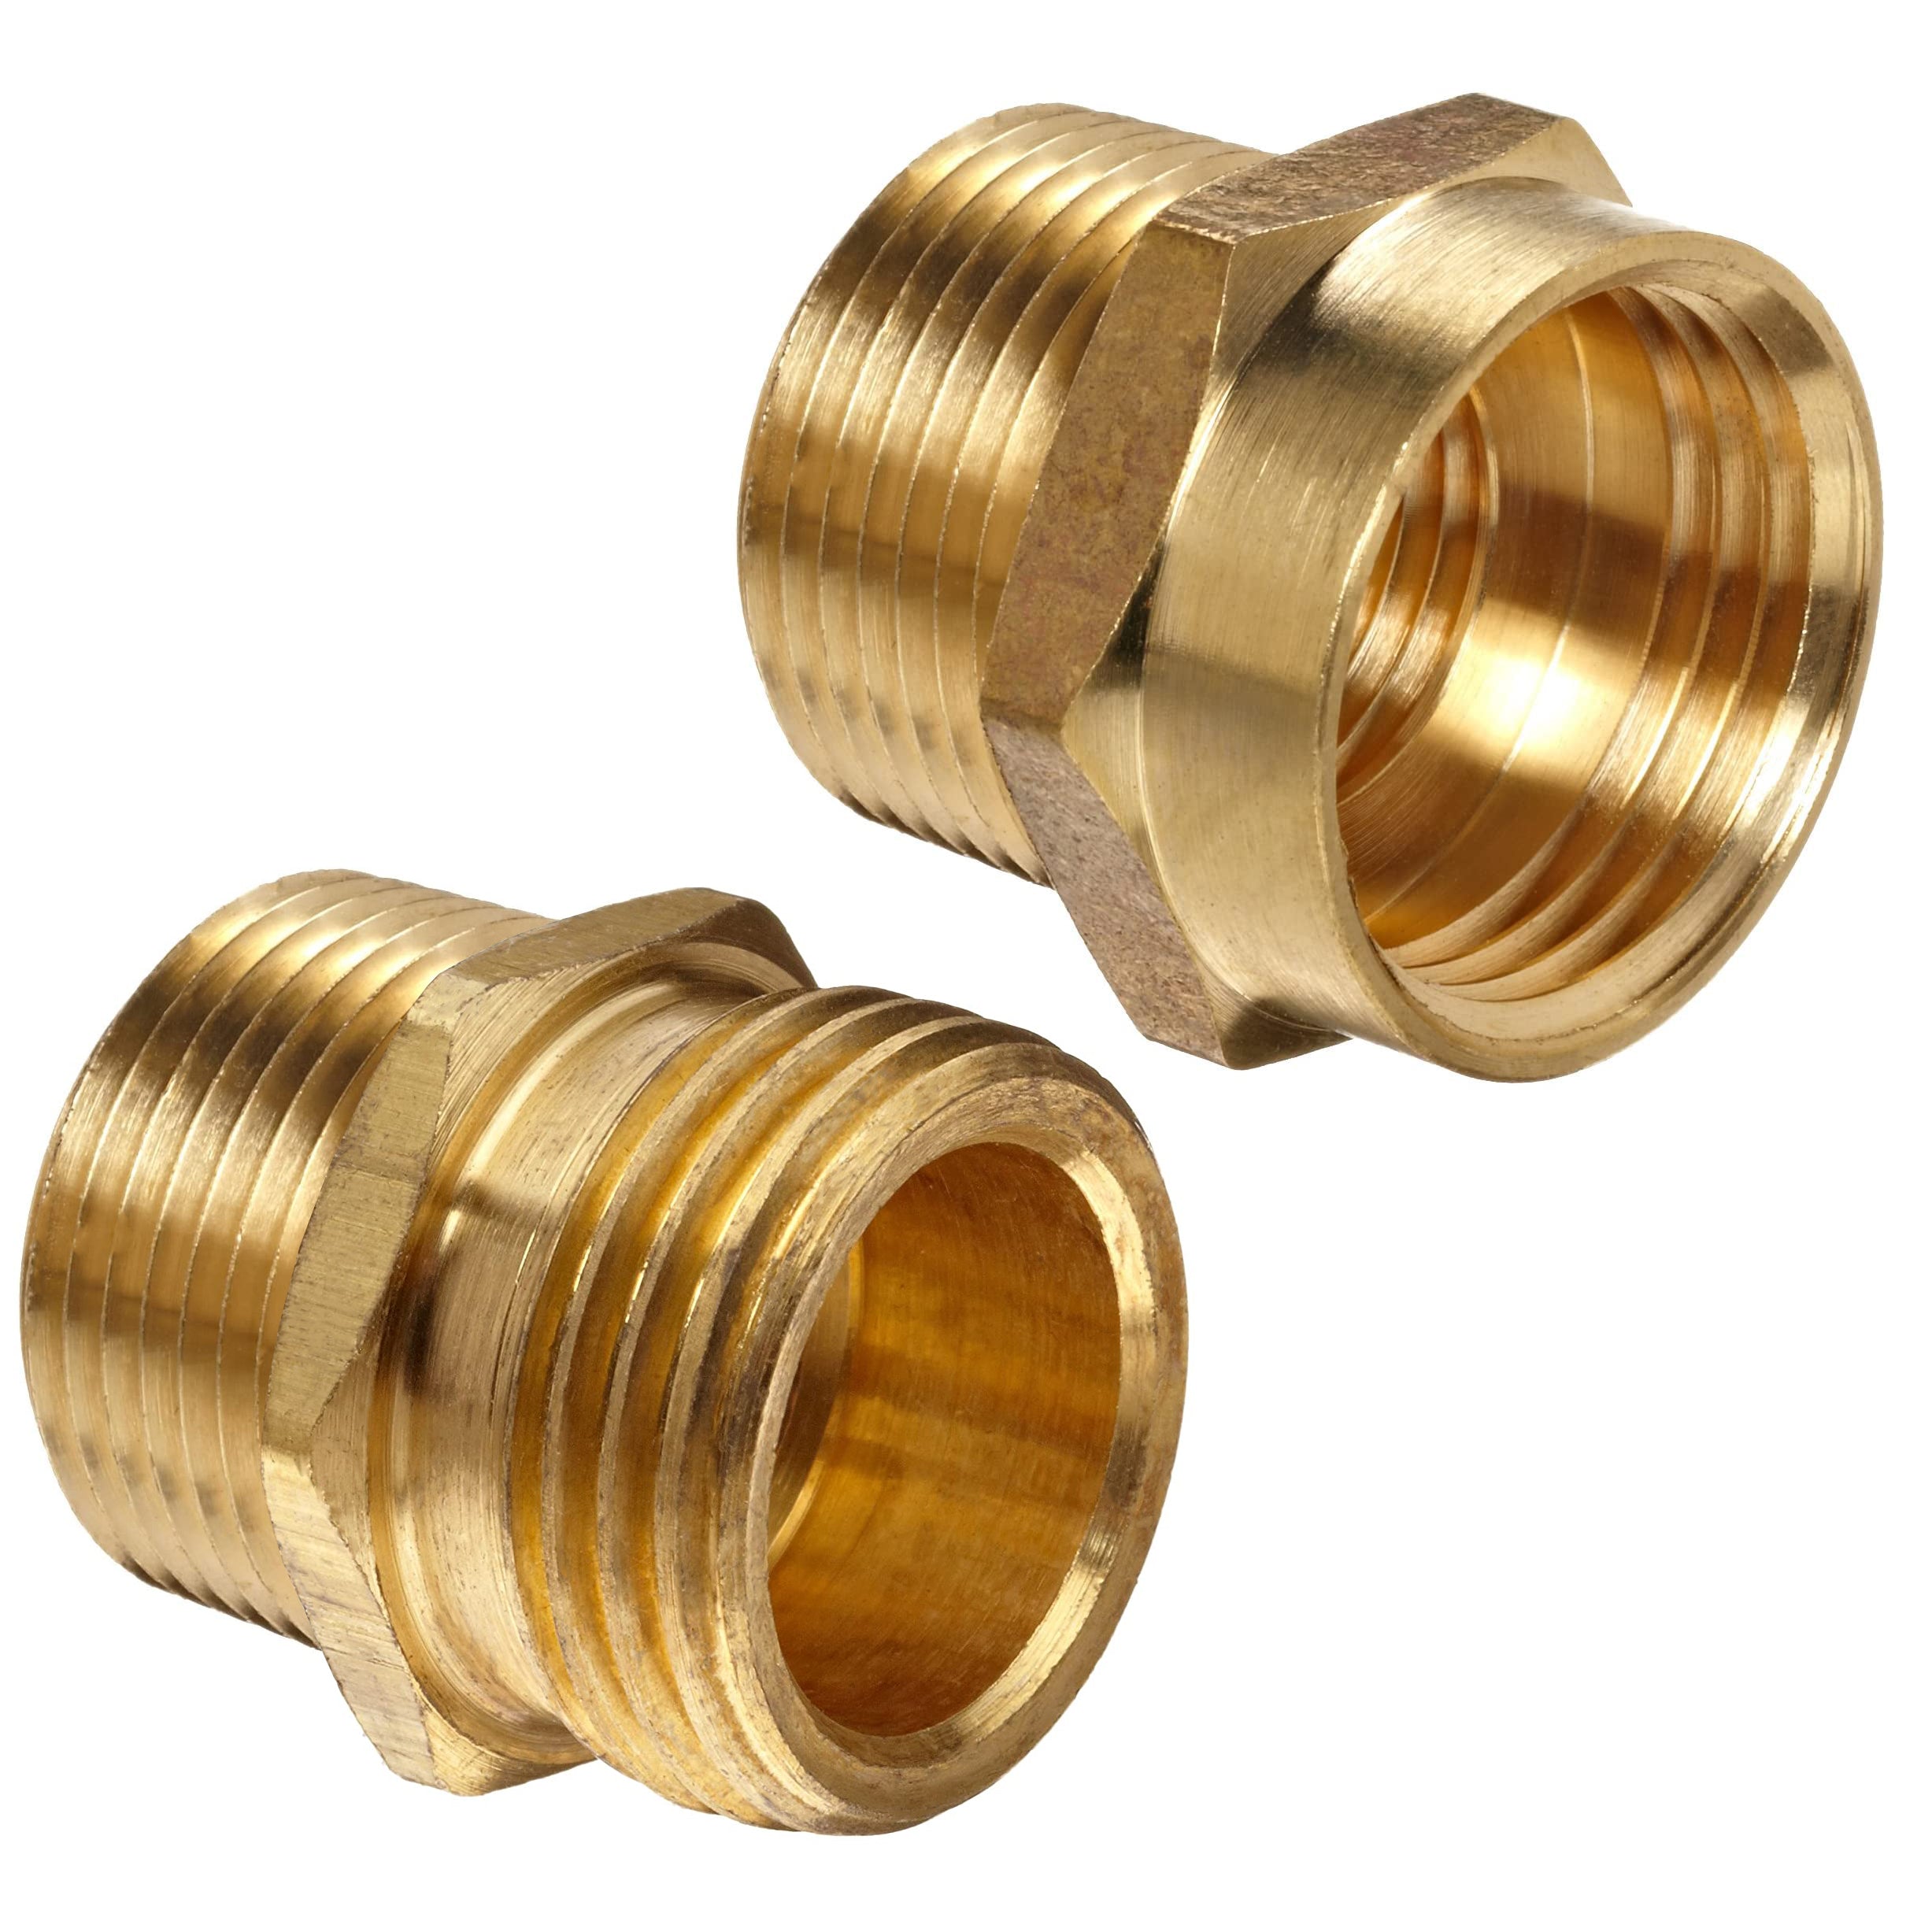 Brass Garden Hose Fitting Adapters 3/4" Male NPT to 3/4" GHT Set